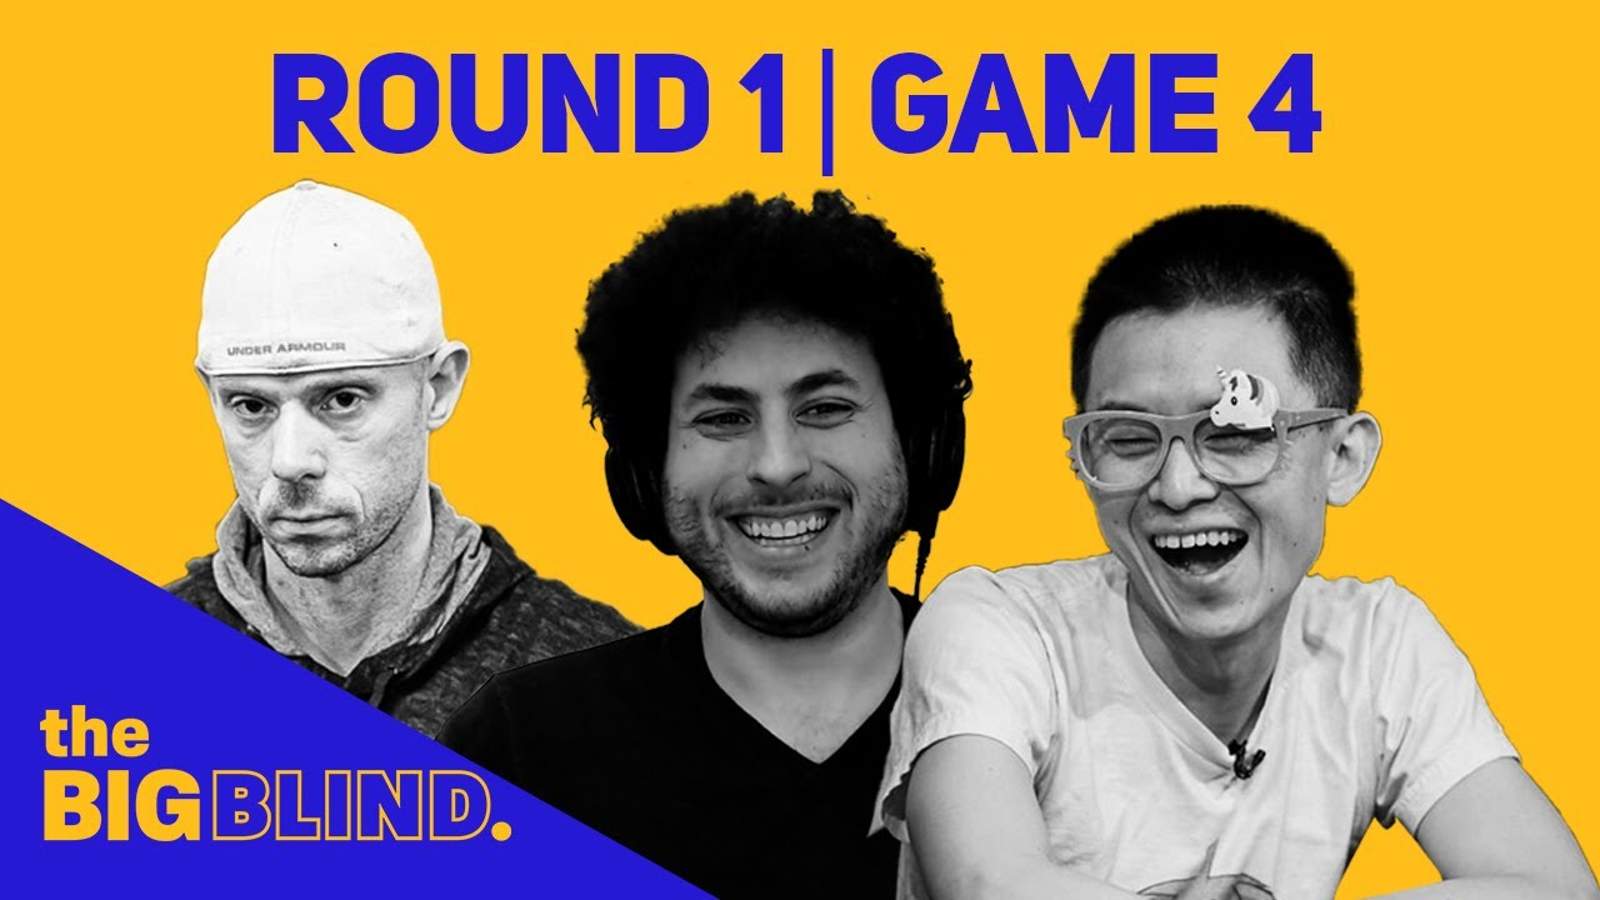 Rewatch Round 1 - Game 4 of The Big Blind on YouTube and Facebook